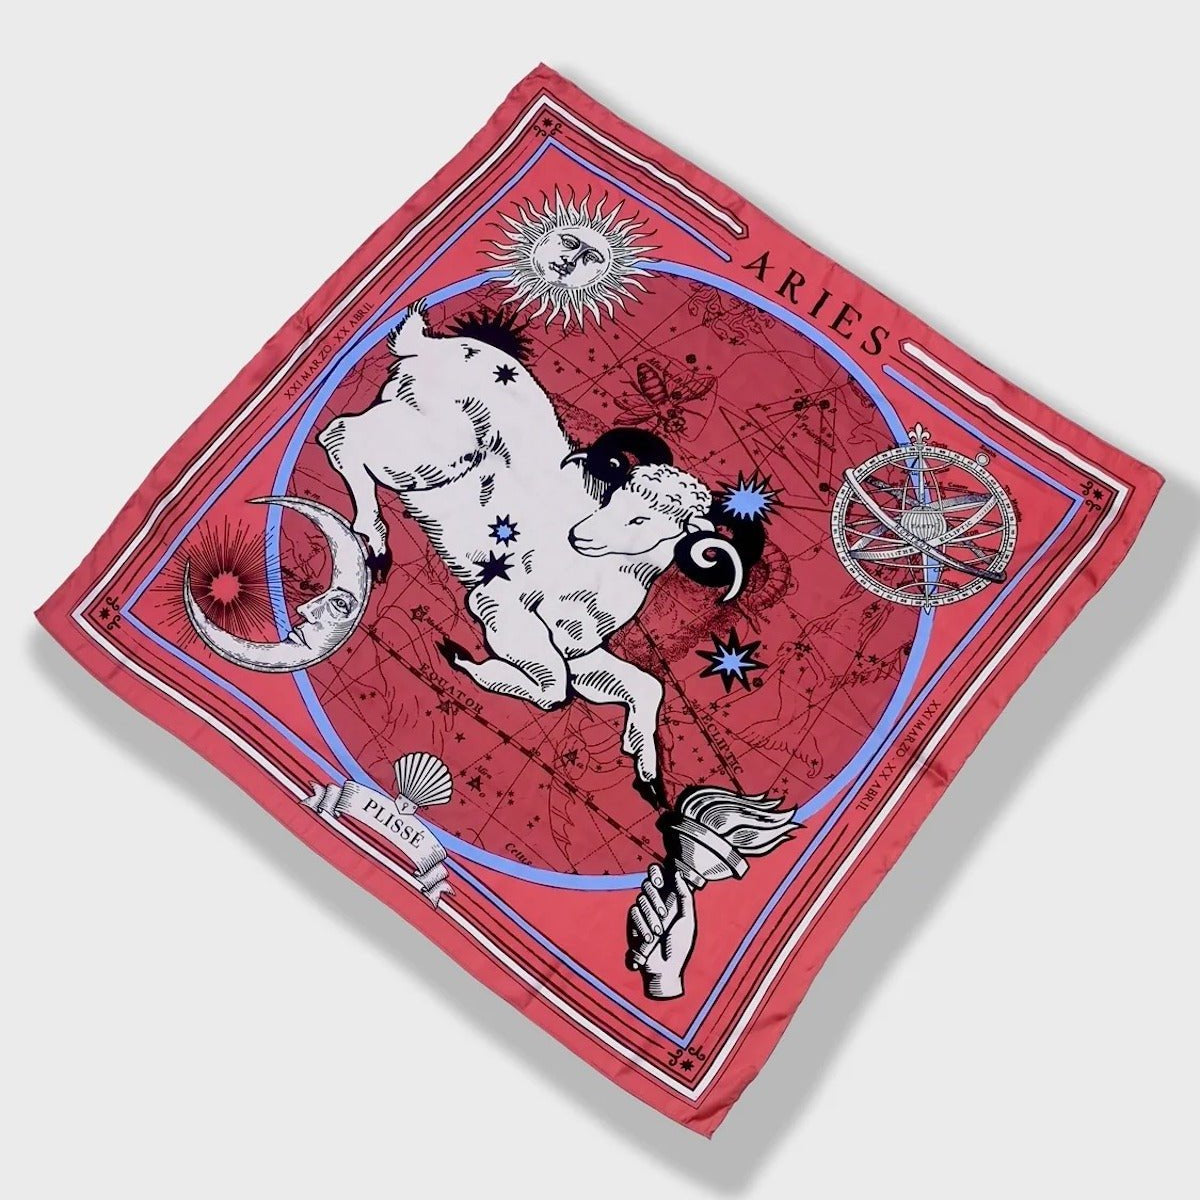 Zodiac Scarf for Aries by Plissé. Red scarf with image of a Ram, sun and moon details, hand holding torch, all on astrological background. Scarf pictured floating on a white background.